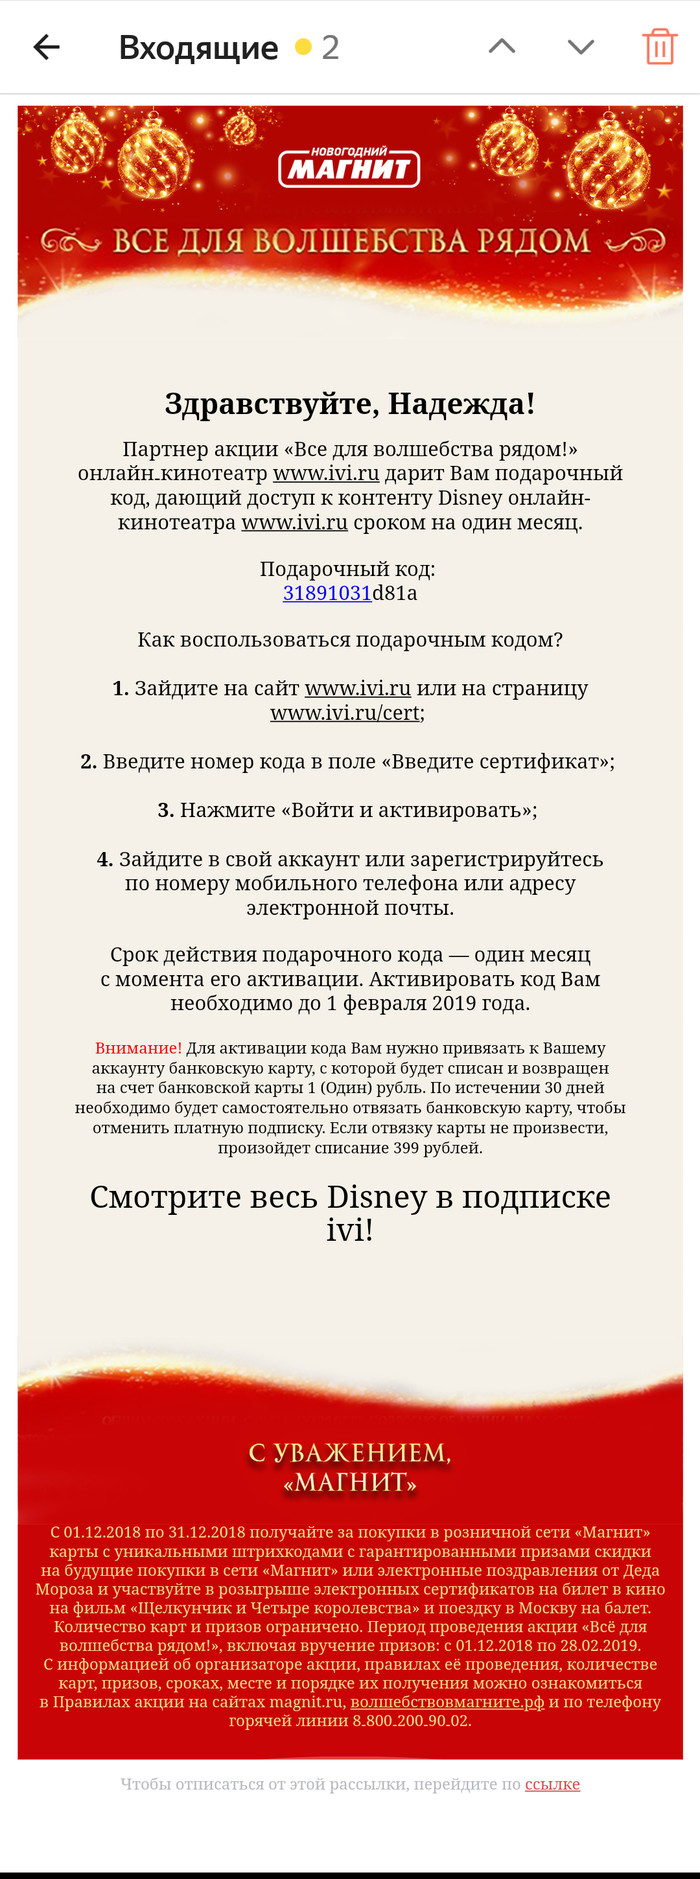 Divorce from ivi.ru, with the assistance of Magnet (read the fine print) - My, Attention, Attentiveness, Be carefull!, Magnet, Ivi, Longpost, Divorce for money